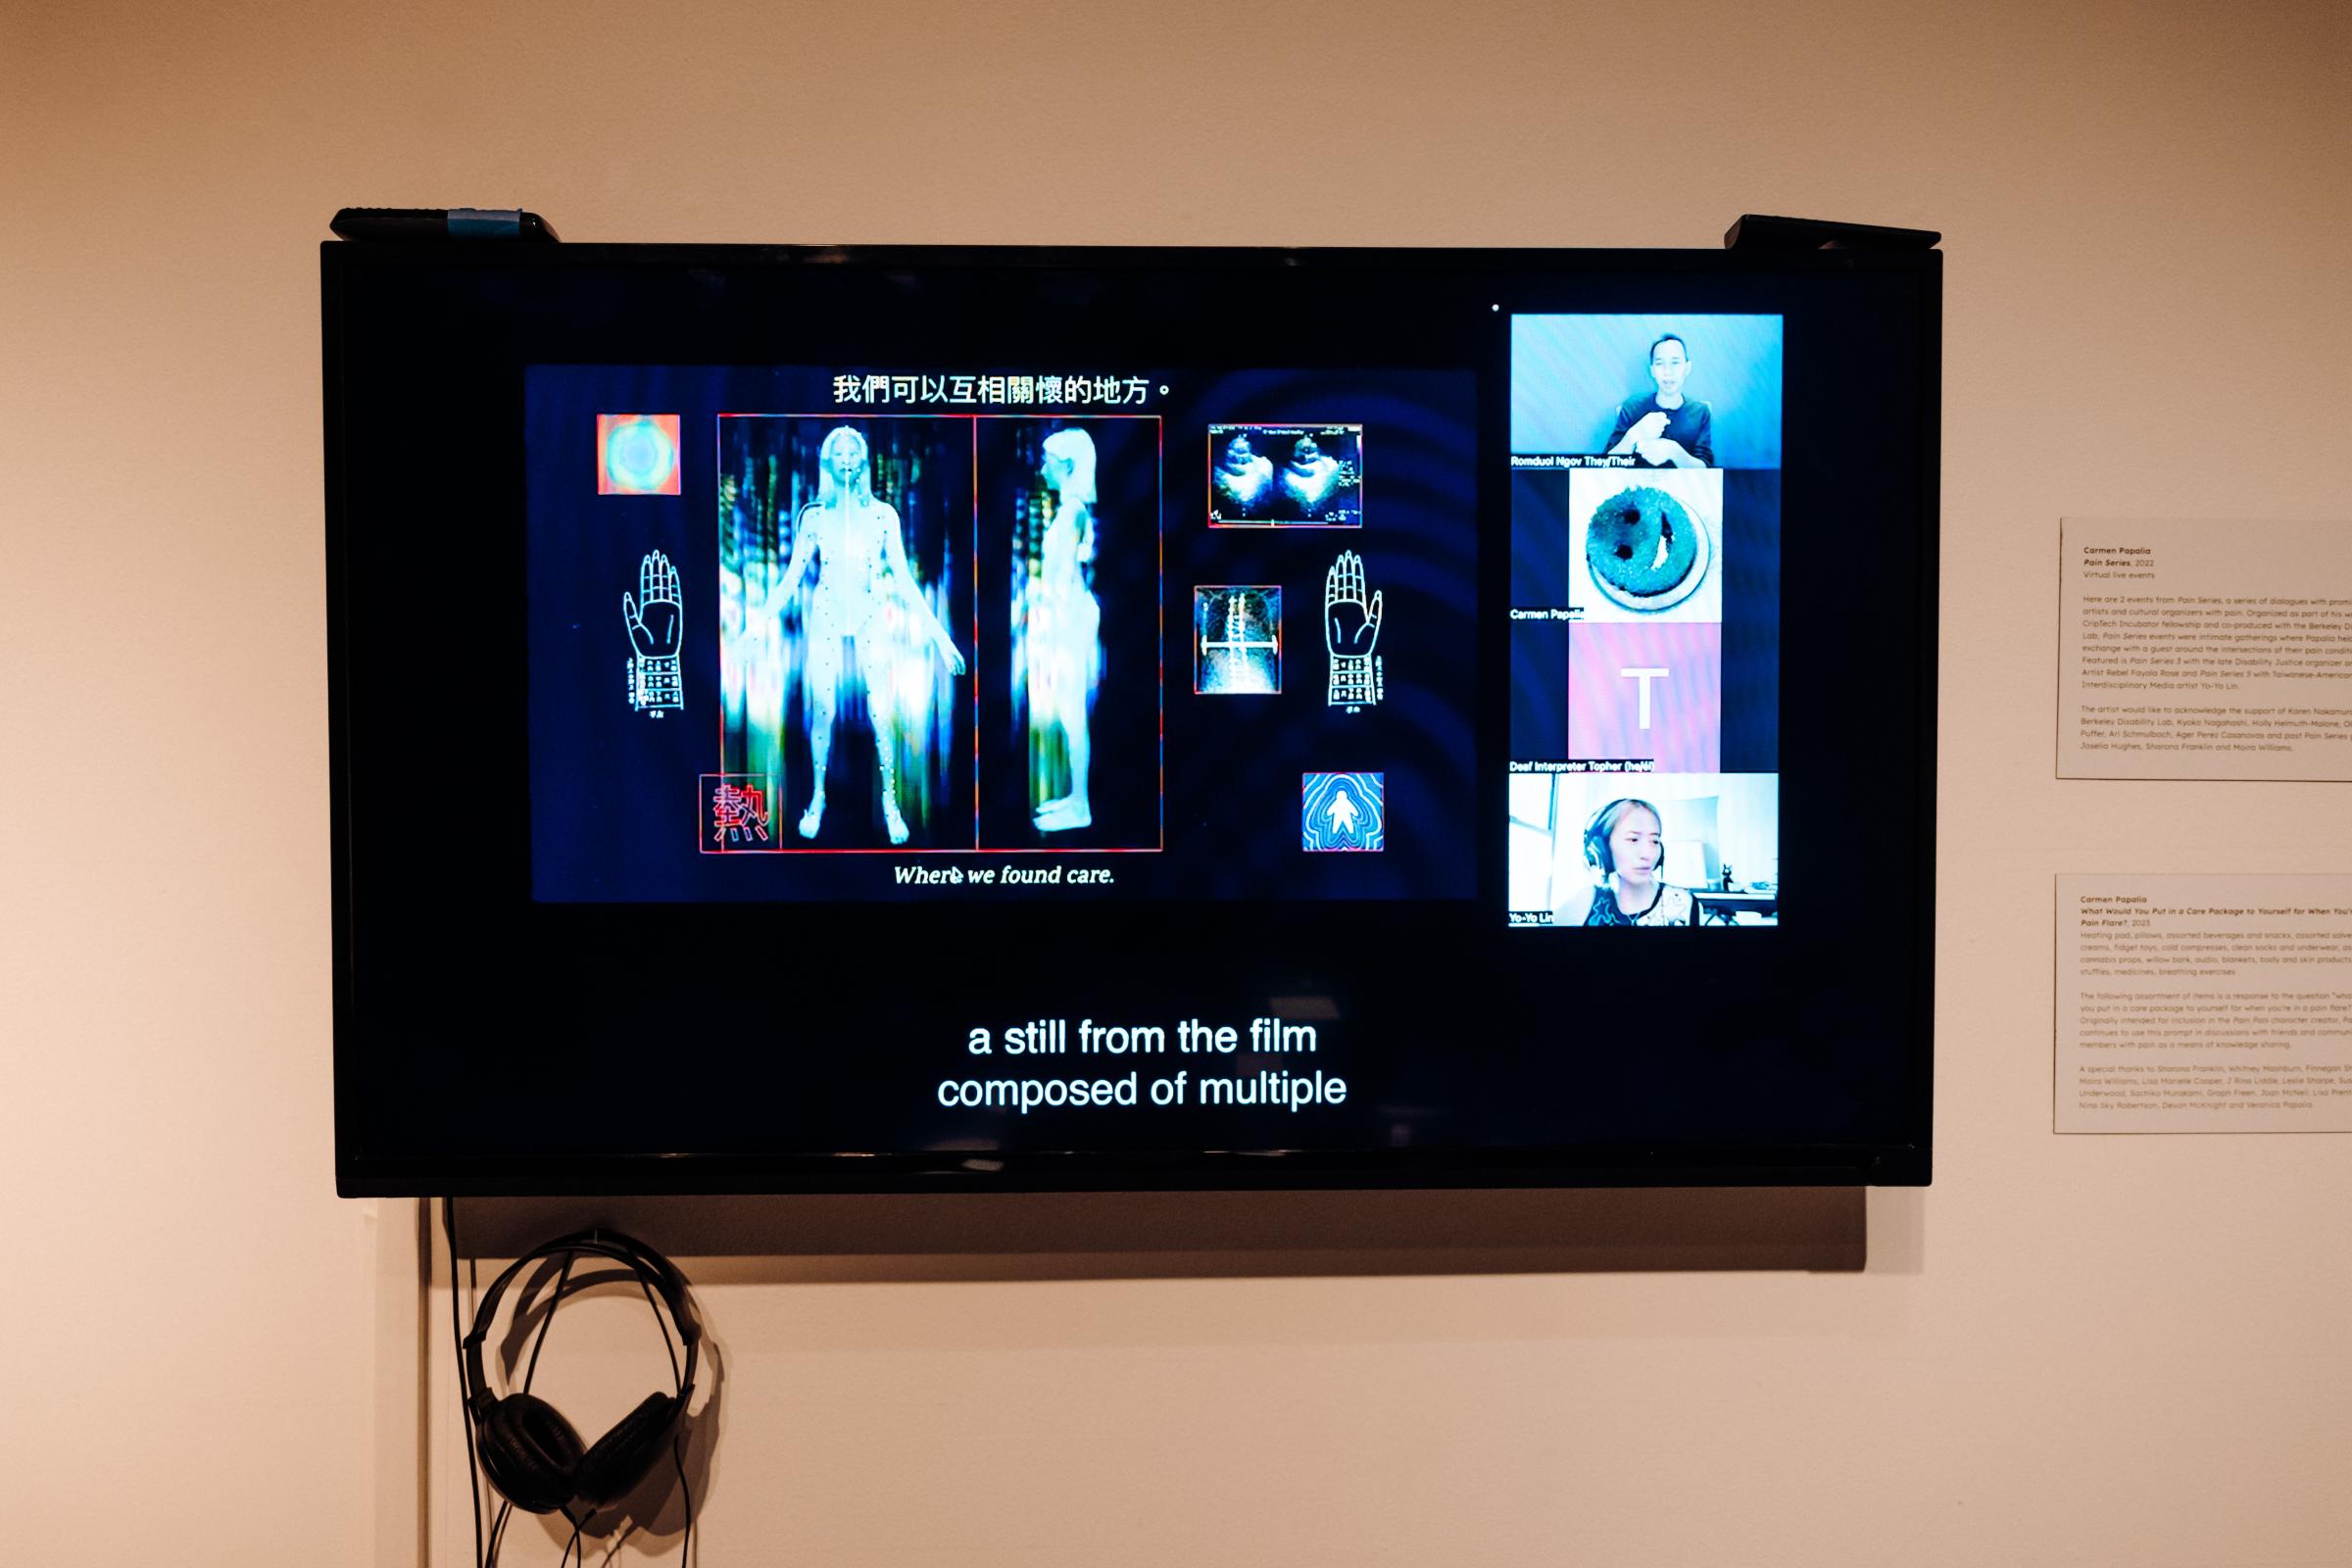 Monitor in the center showcasing an X-ray image of a female body on a zoom call. At the bottom of the monitor hangs a pair of headphones that connect to the monitor. To the right are two wall text blurbs. 

